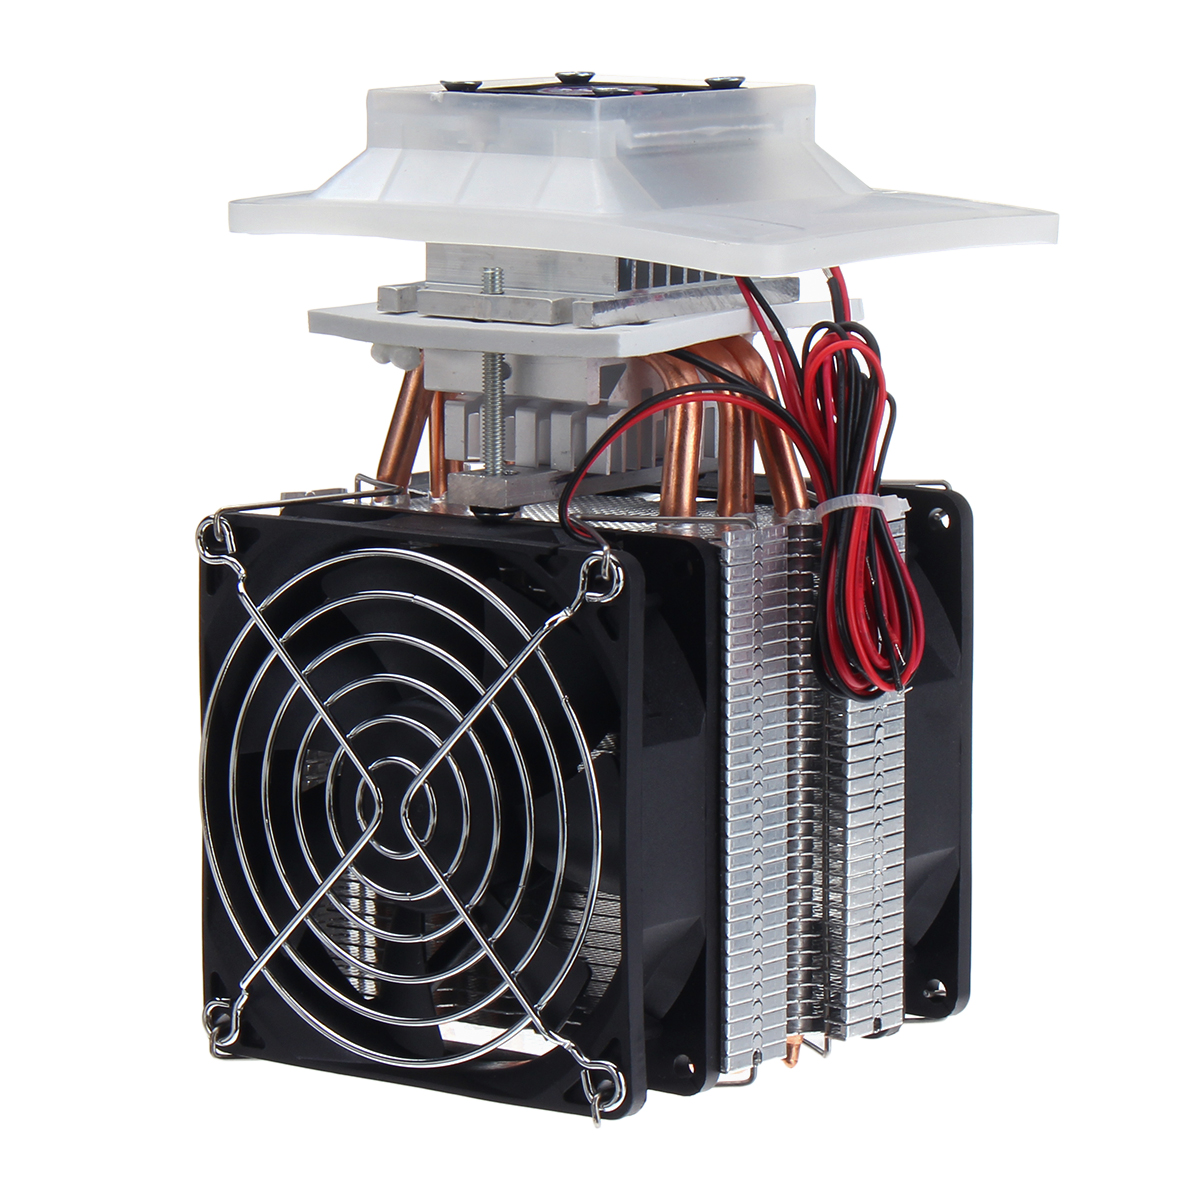 

12V Computer CPU Cooling Fan Thermoelectric Peltier Refrigeration Cooling System